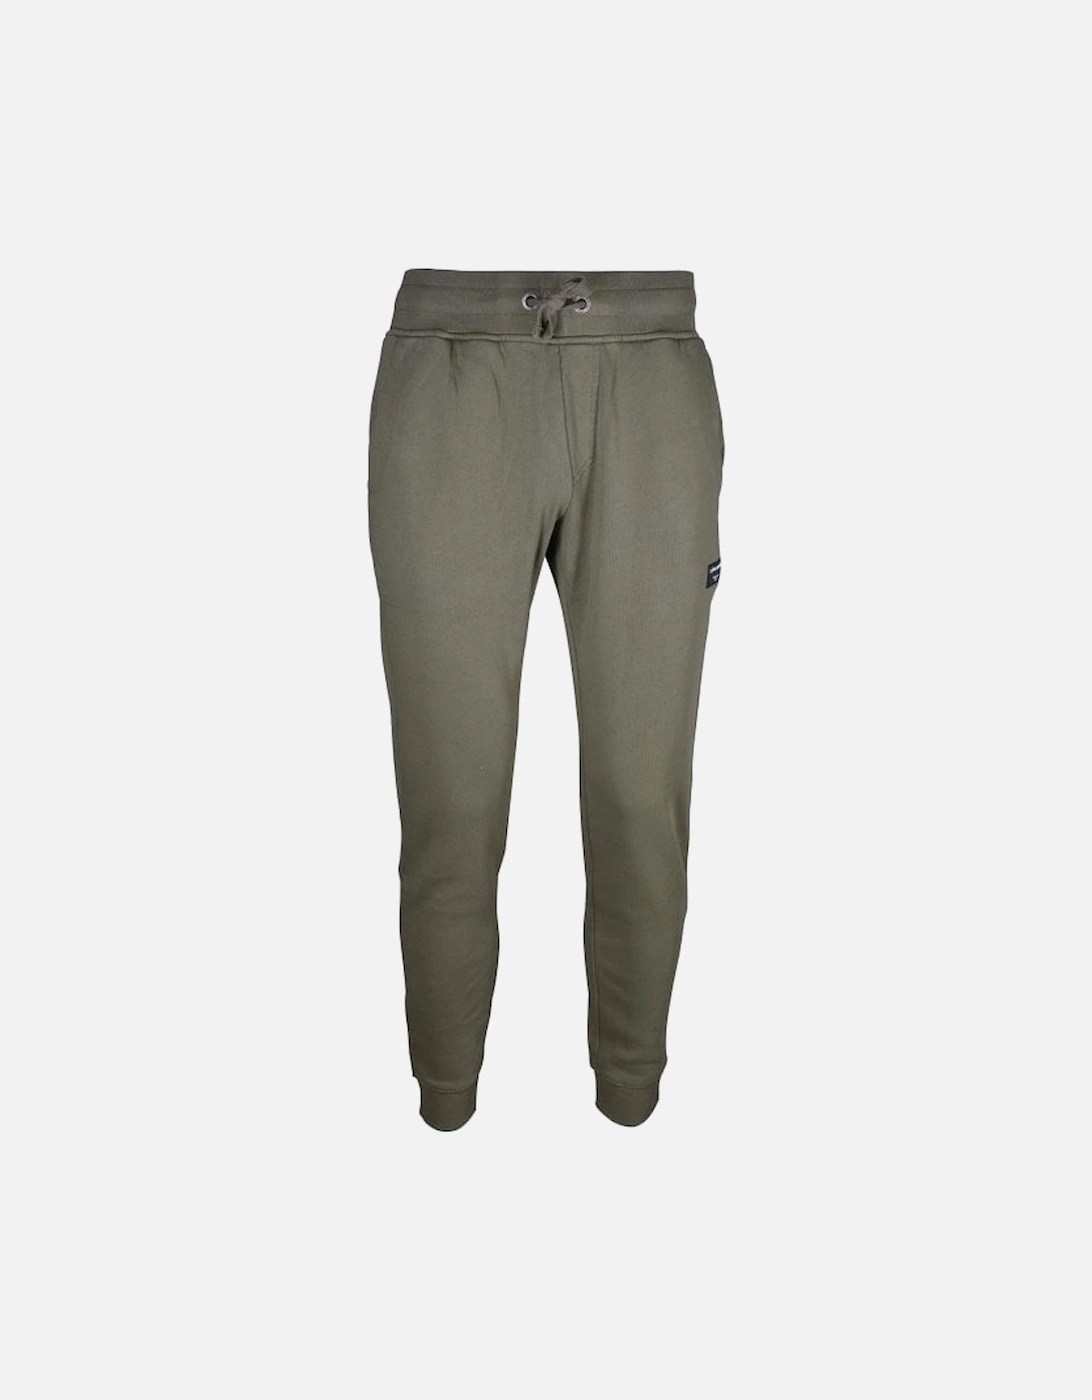 Centre Tracksuit Tapered Jogging Bottoms, Ivy Green, 9 of 8